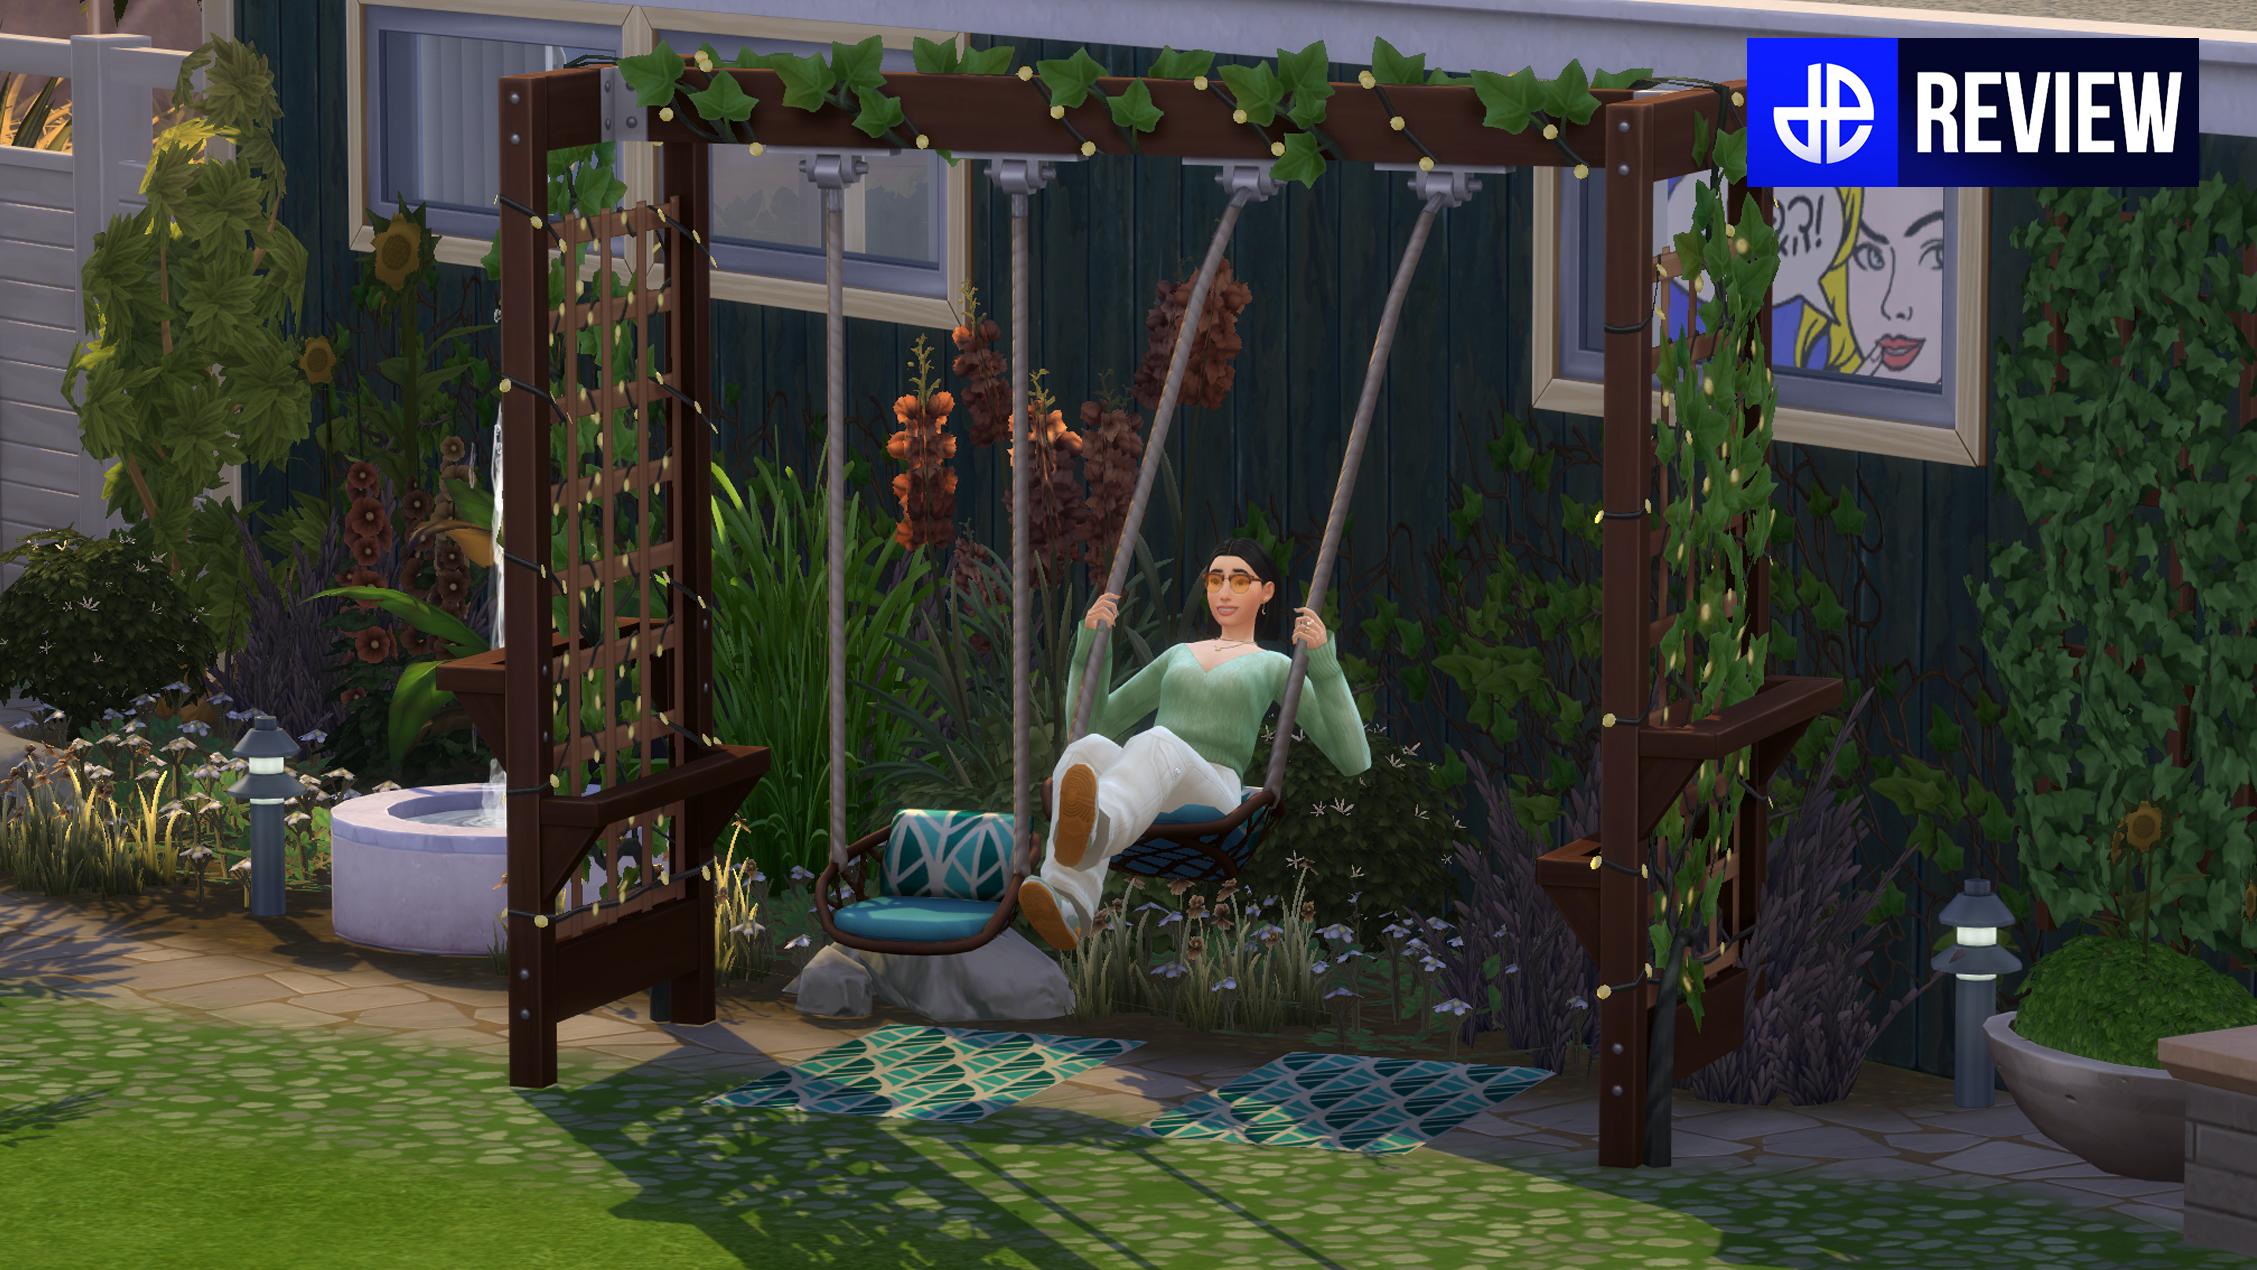 An image of a Sim in Moonlight Chic Kit clothing on a swing from the Little Campers Kit in The Sims 4